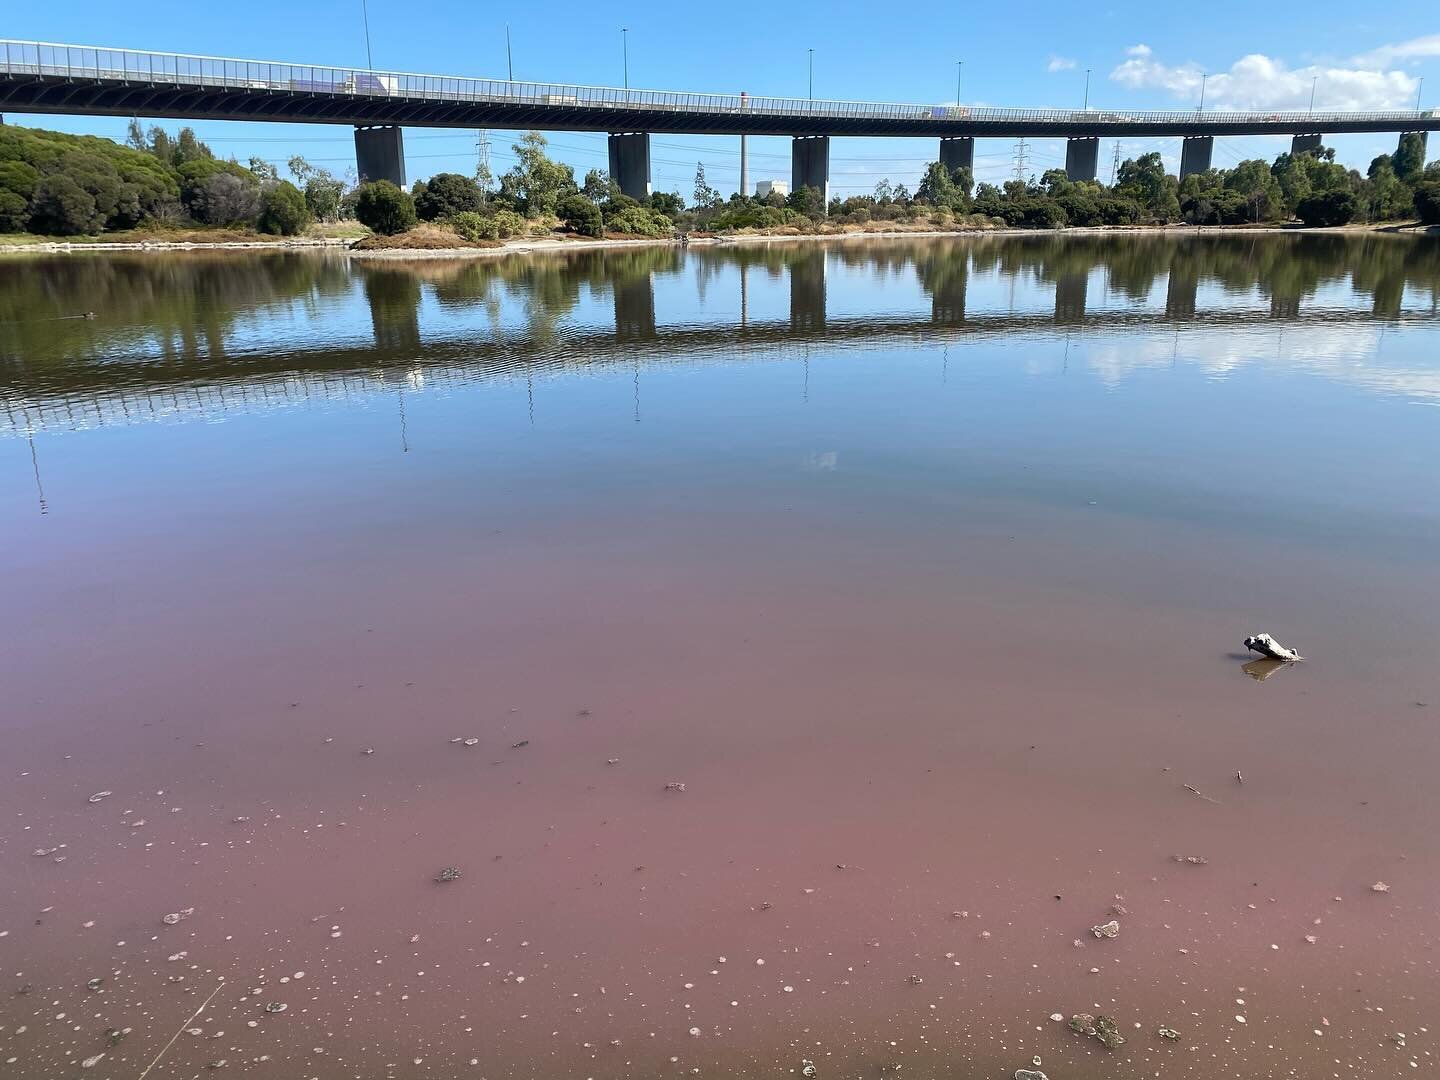 The lake is pink around the edges at West Gate Park